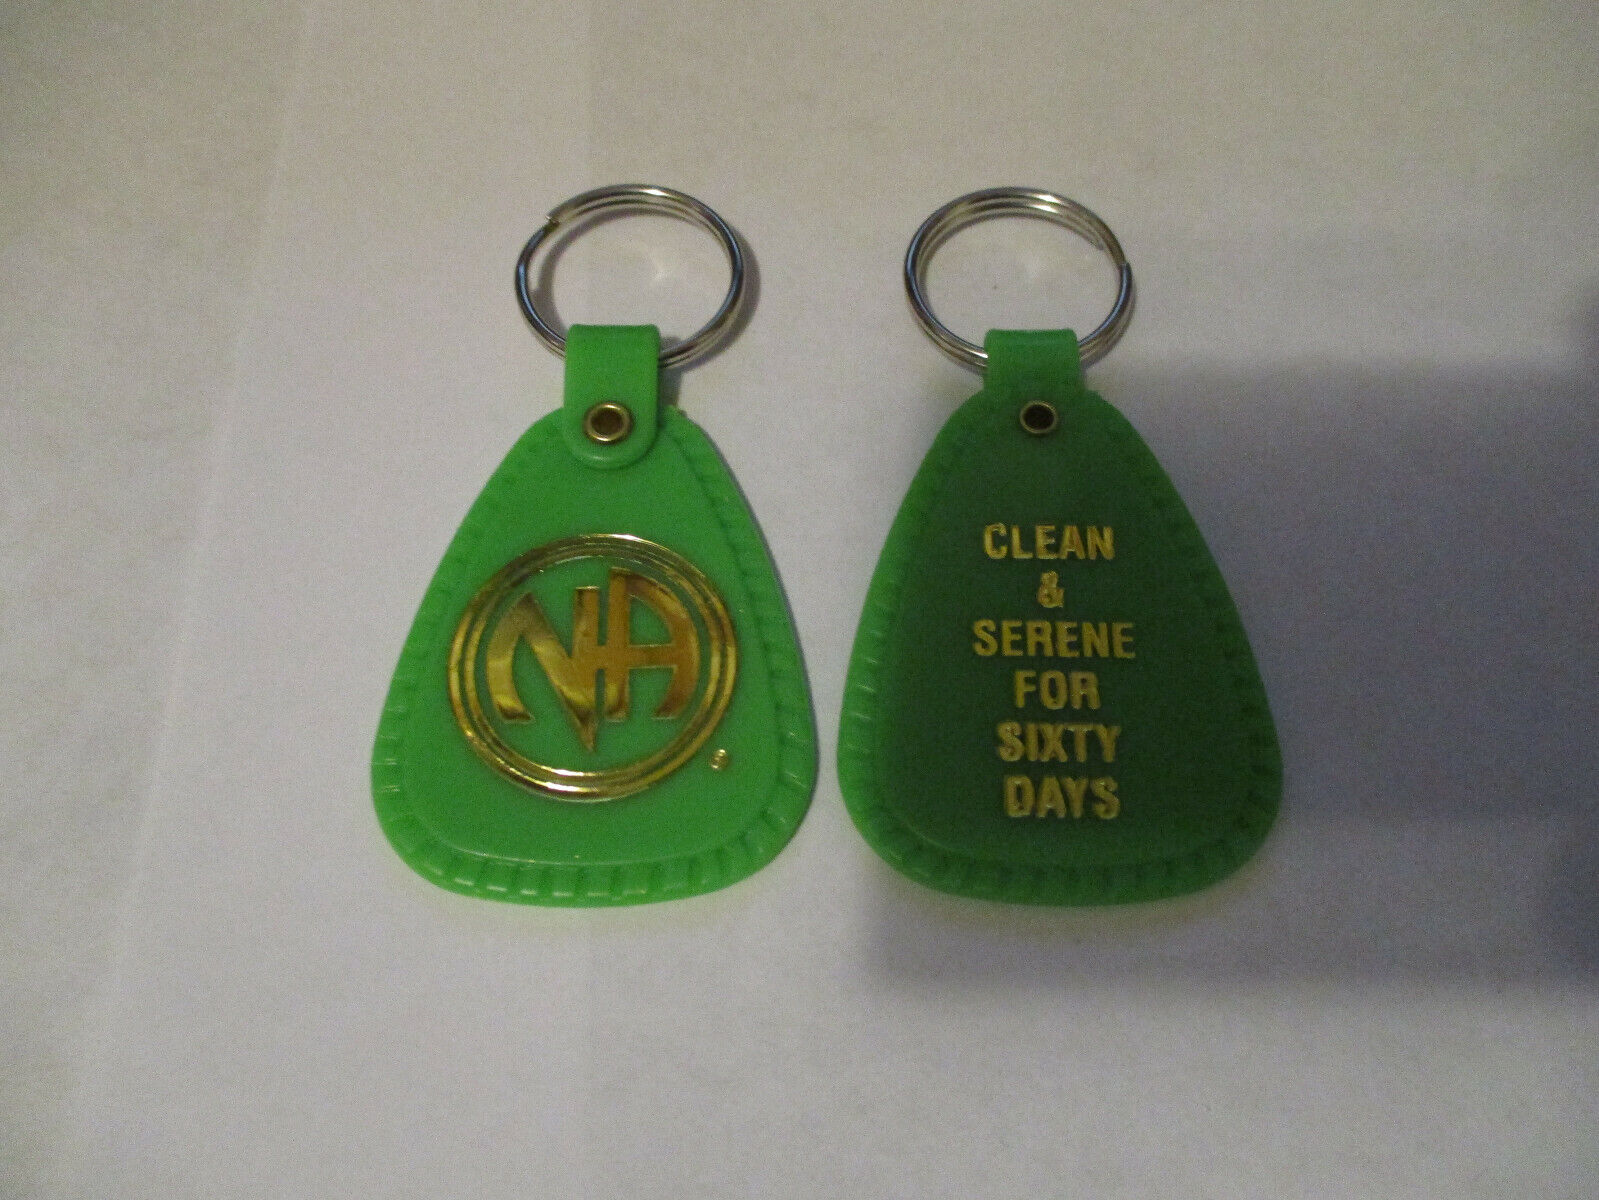 NA NARCOTICS ANONYMOUS KEY TAG CLEAN TIME - 60 DAYS